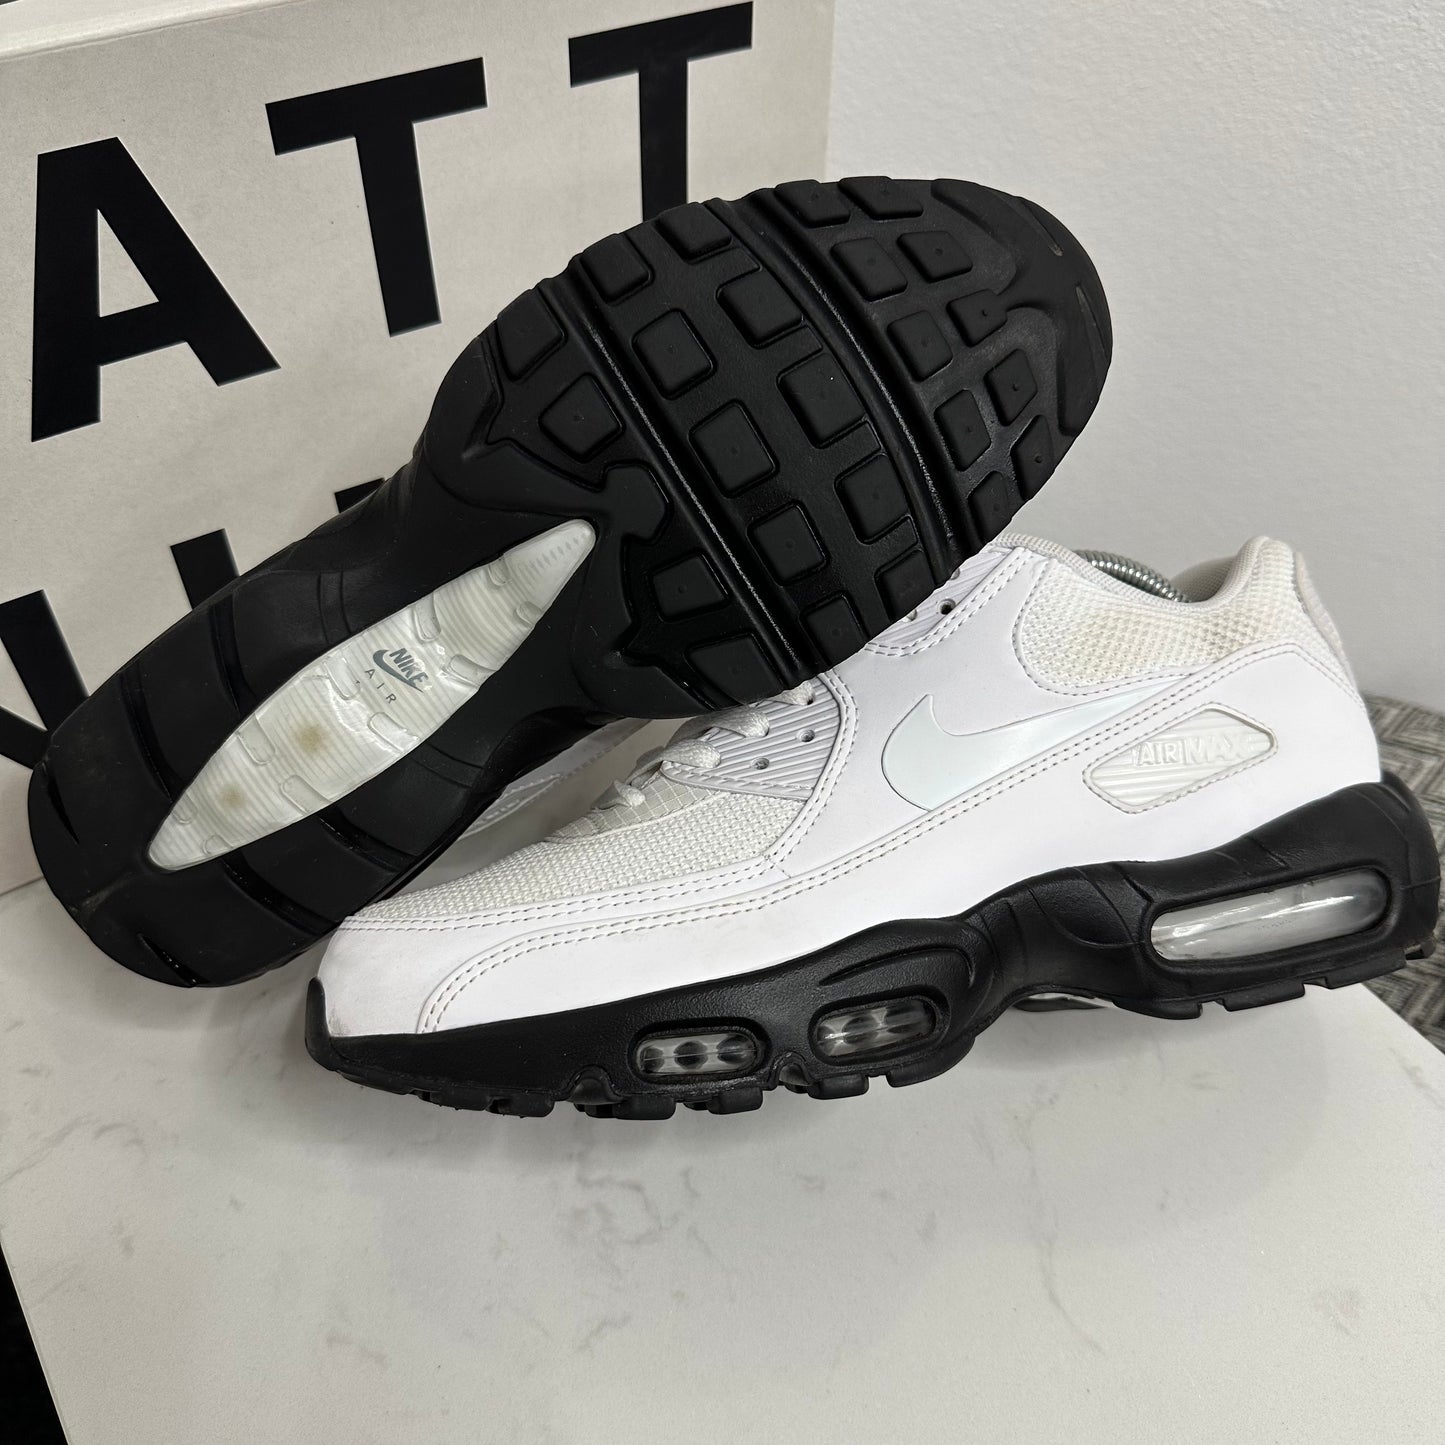 Used Air Max 95 x 90 Patta By You